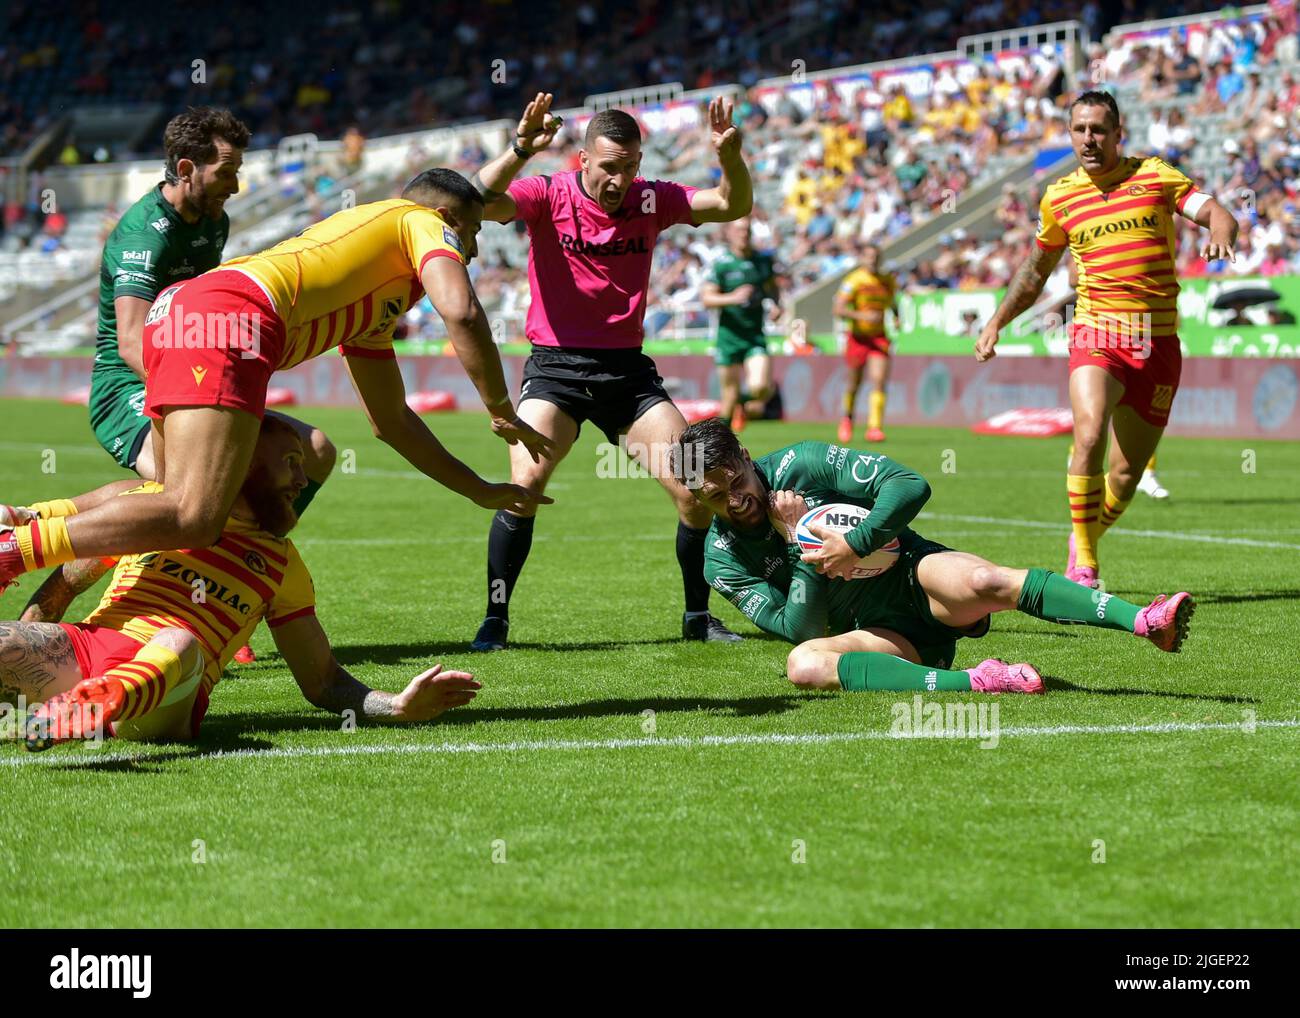 Newcastle, UK. 10th July, 2022. Gareth Widdop of Warrington Wolves holds his arm as his scores a try Catalans Dragons V Warrington Wolves Event: Magic Weekend 2022 Venue: St James Park, Newcastle, UK Date: 10th July 2022 Credit: Craig Cresswell/Alamy Live News Stock Photo